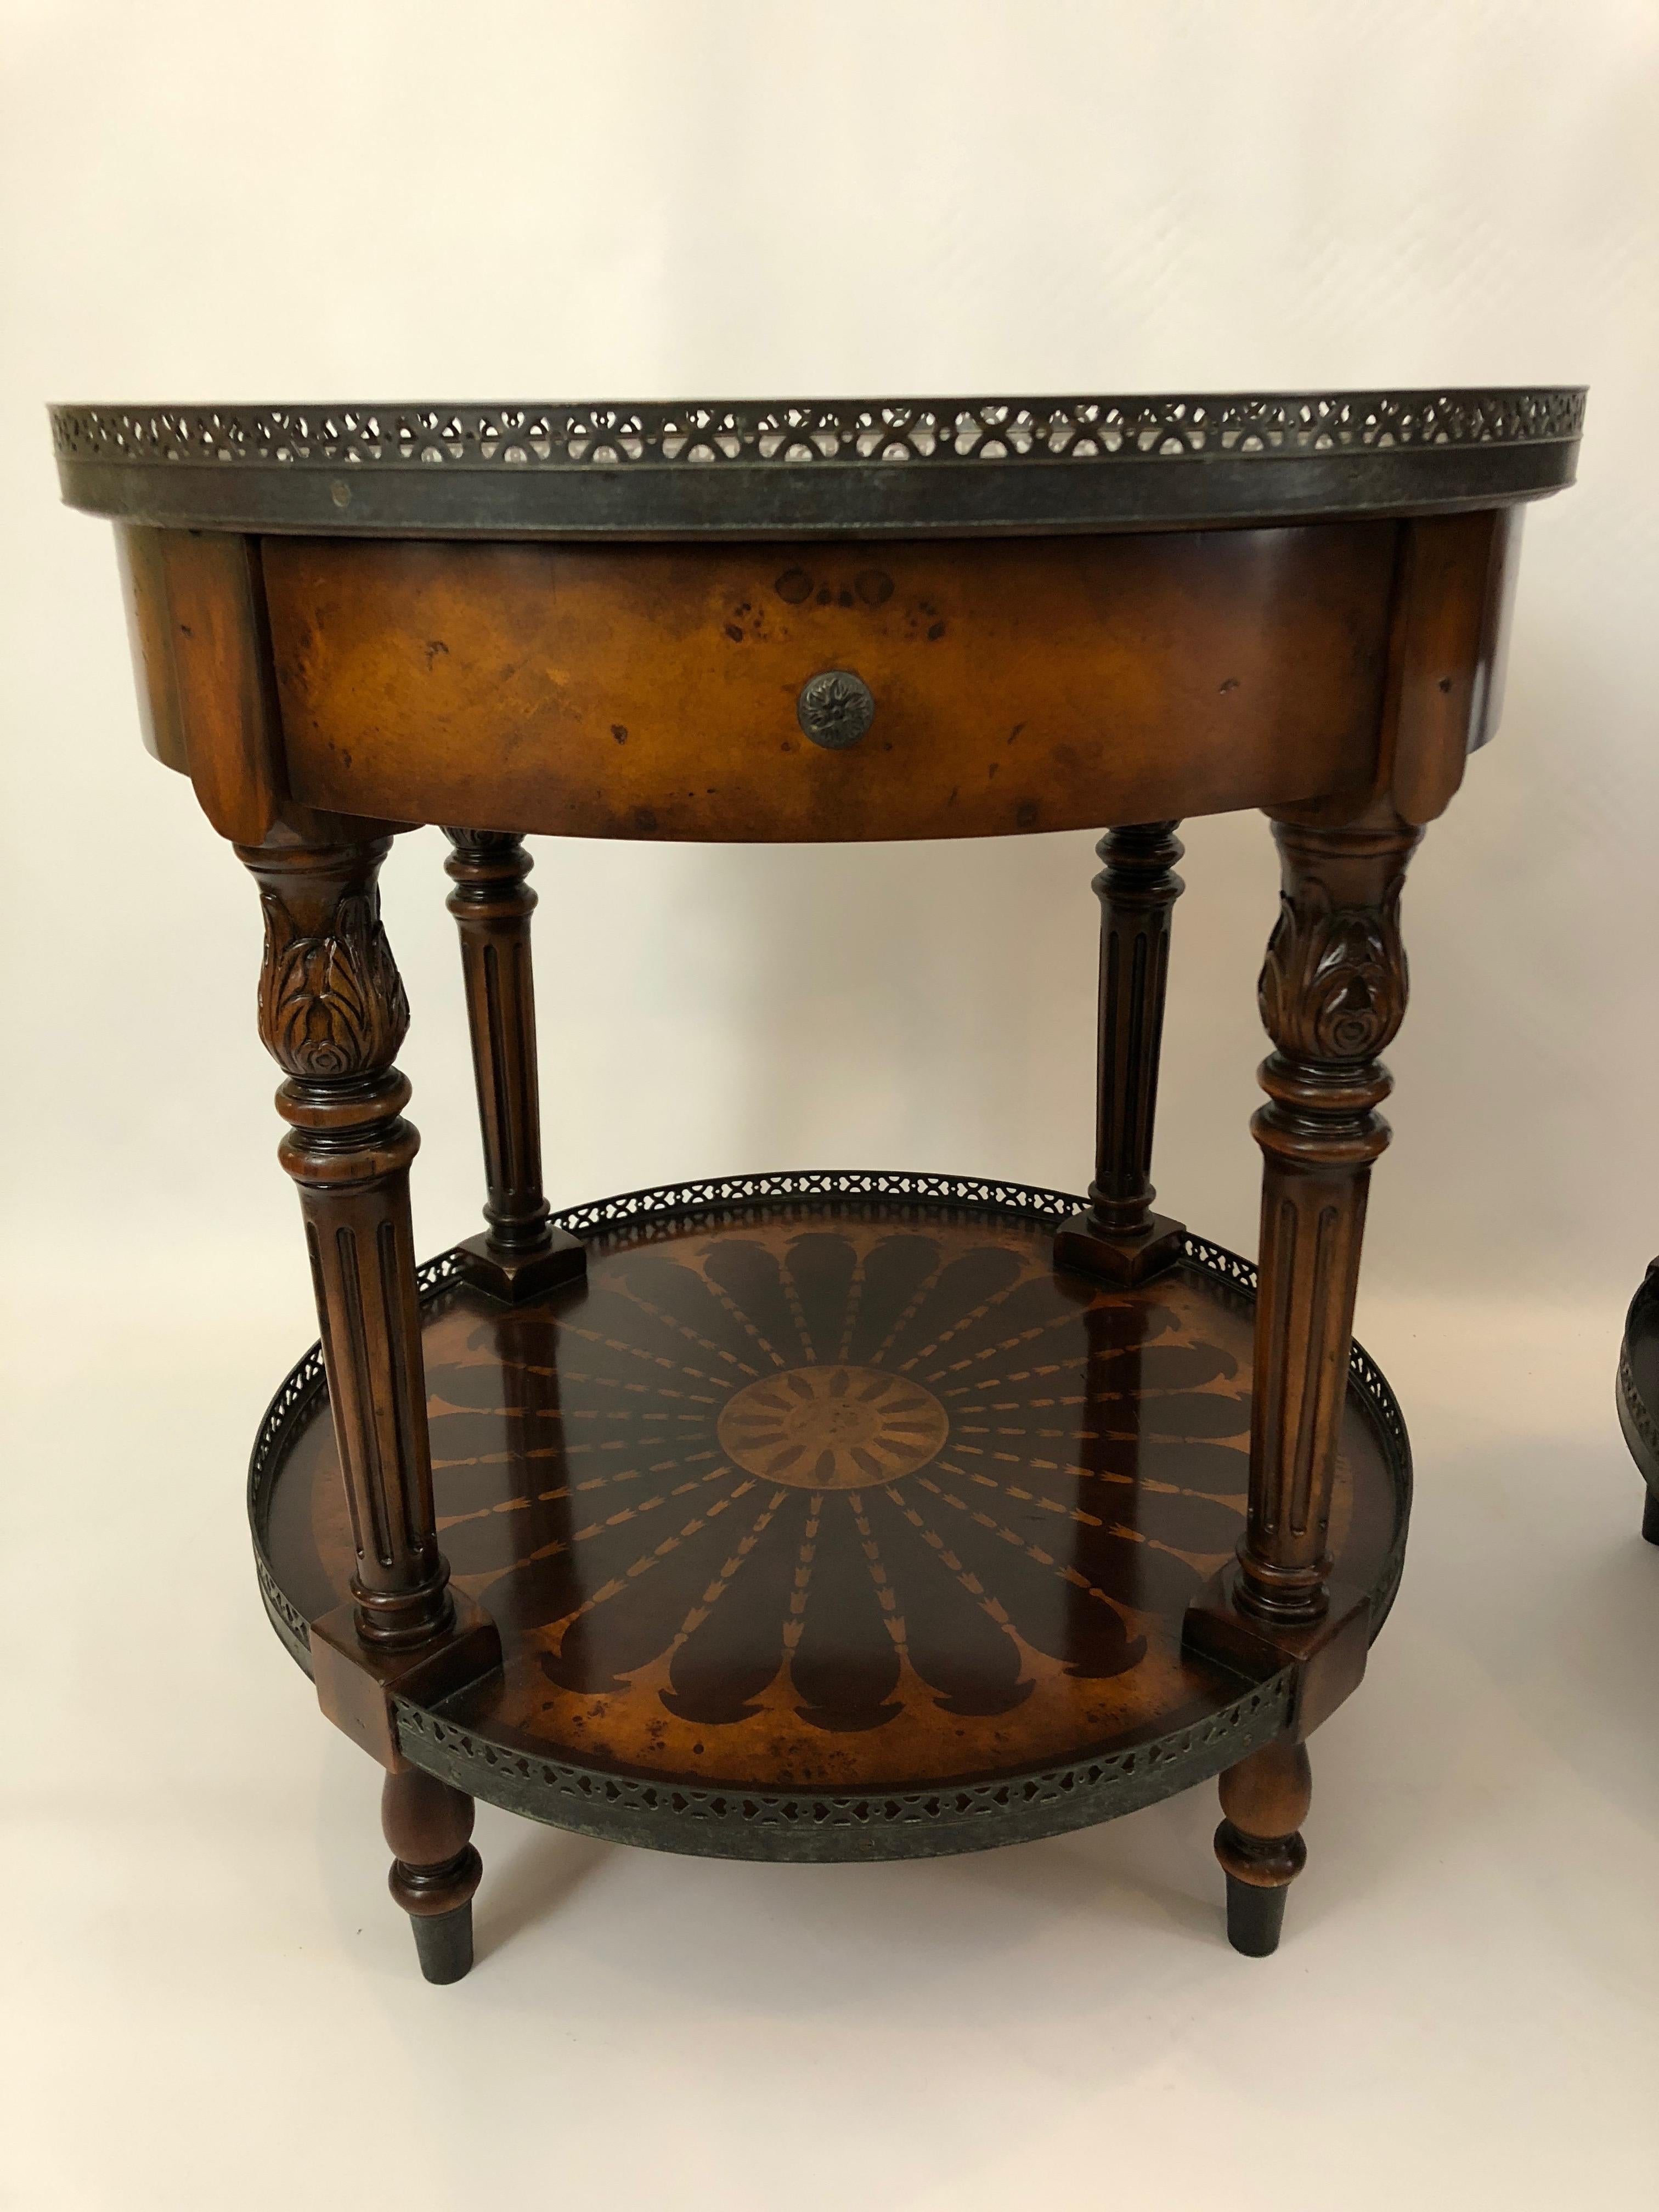 Impressively crafted pair of two-tier zebrawood and burl round side tables having handsome brass galleries, turned legs, single drawer, and unbelievably intricate inlaid patterned design that looks like art itself.